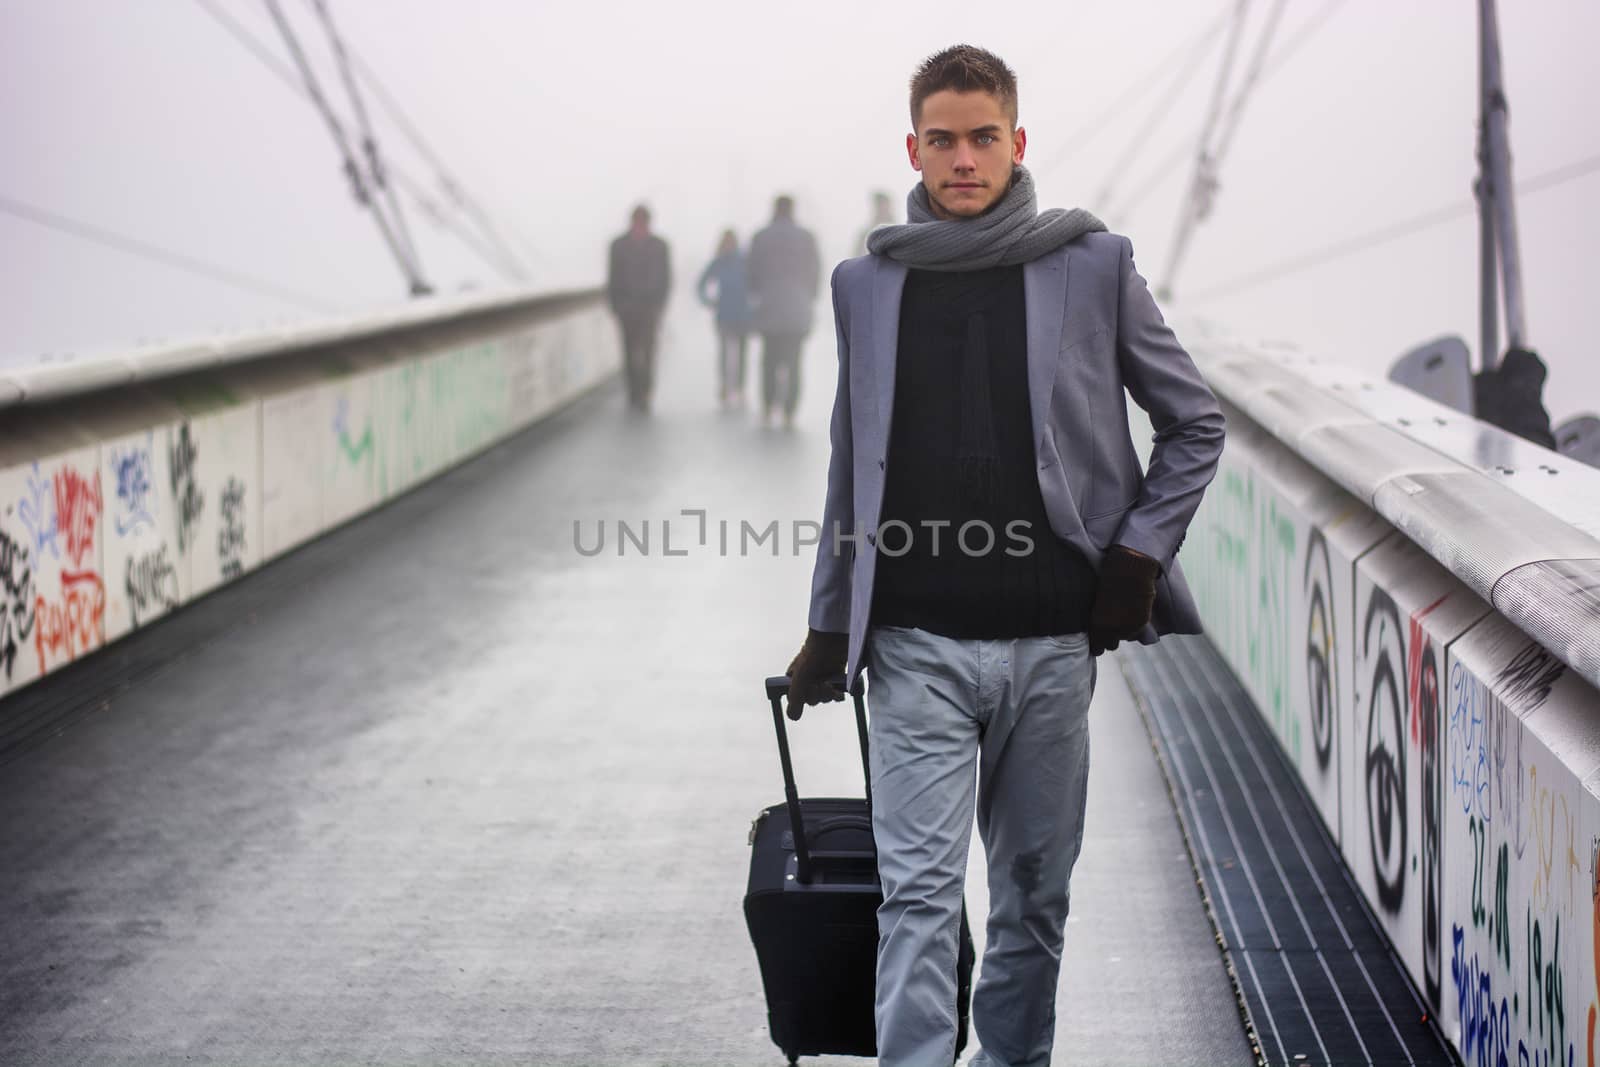 Trendy handsome man walking across a bridge on a misty cold day pulling a suitcase behind him as he departs on a trip